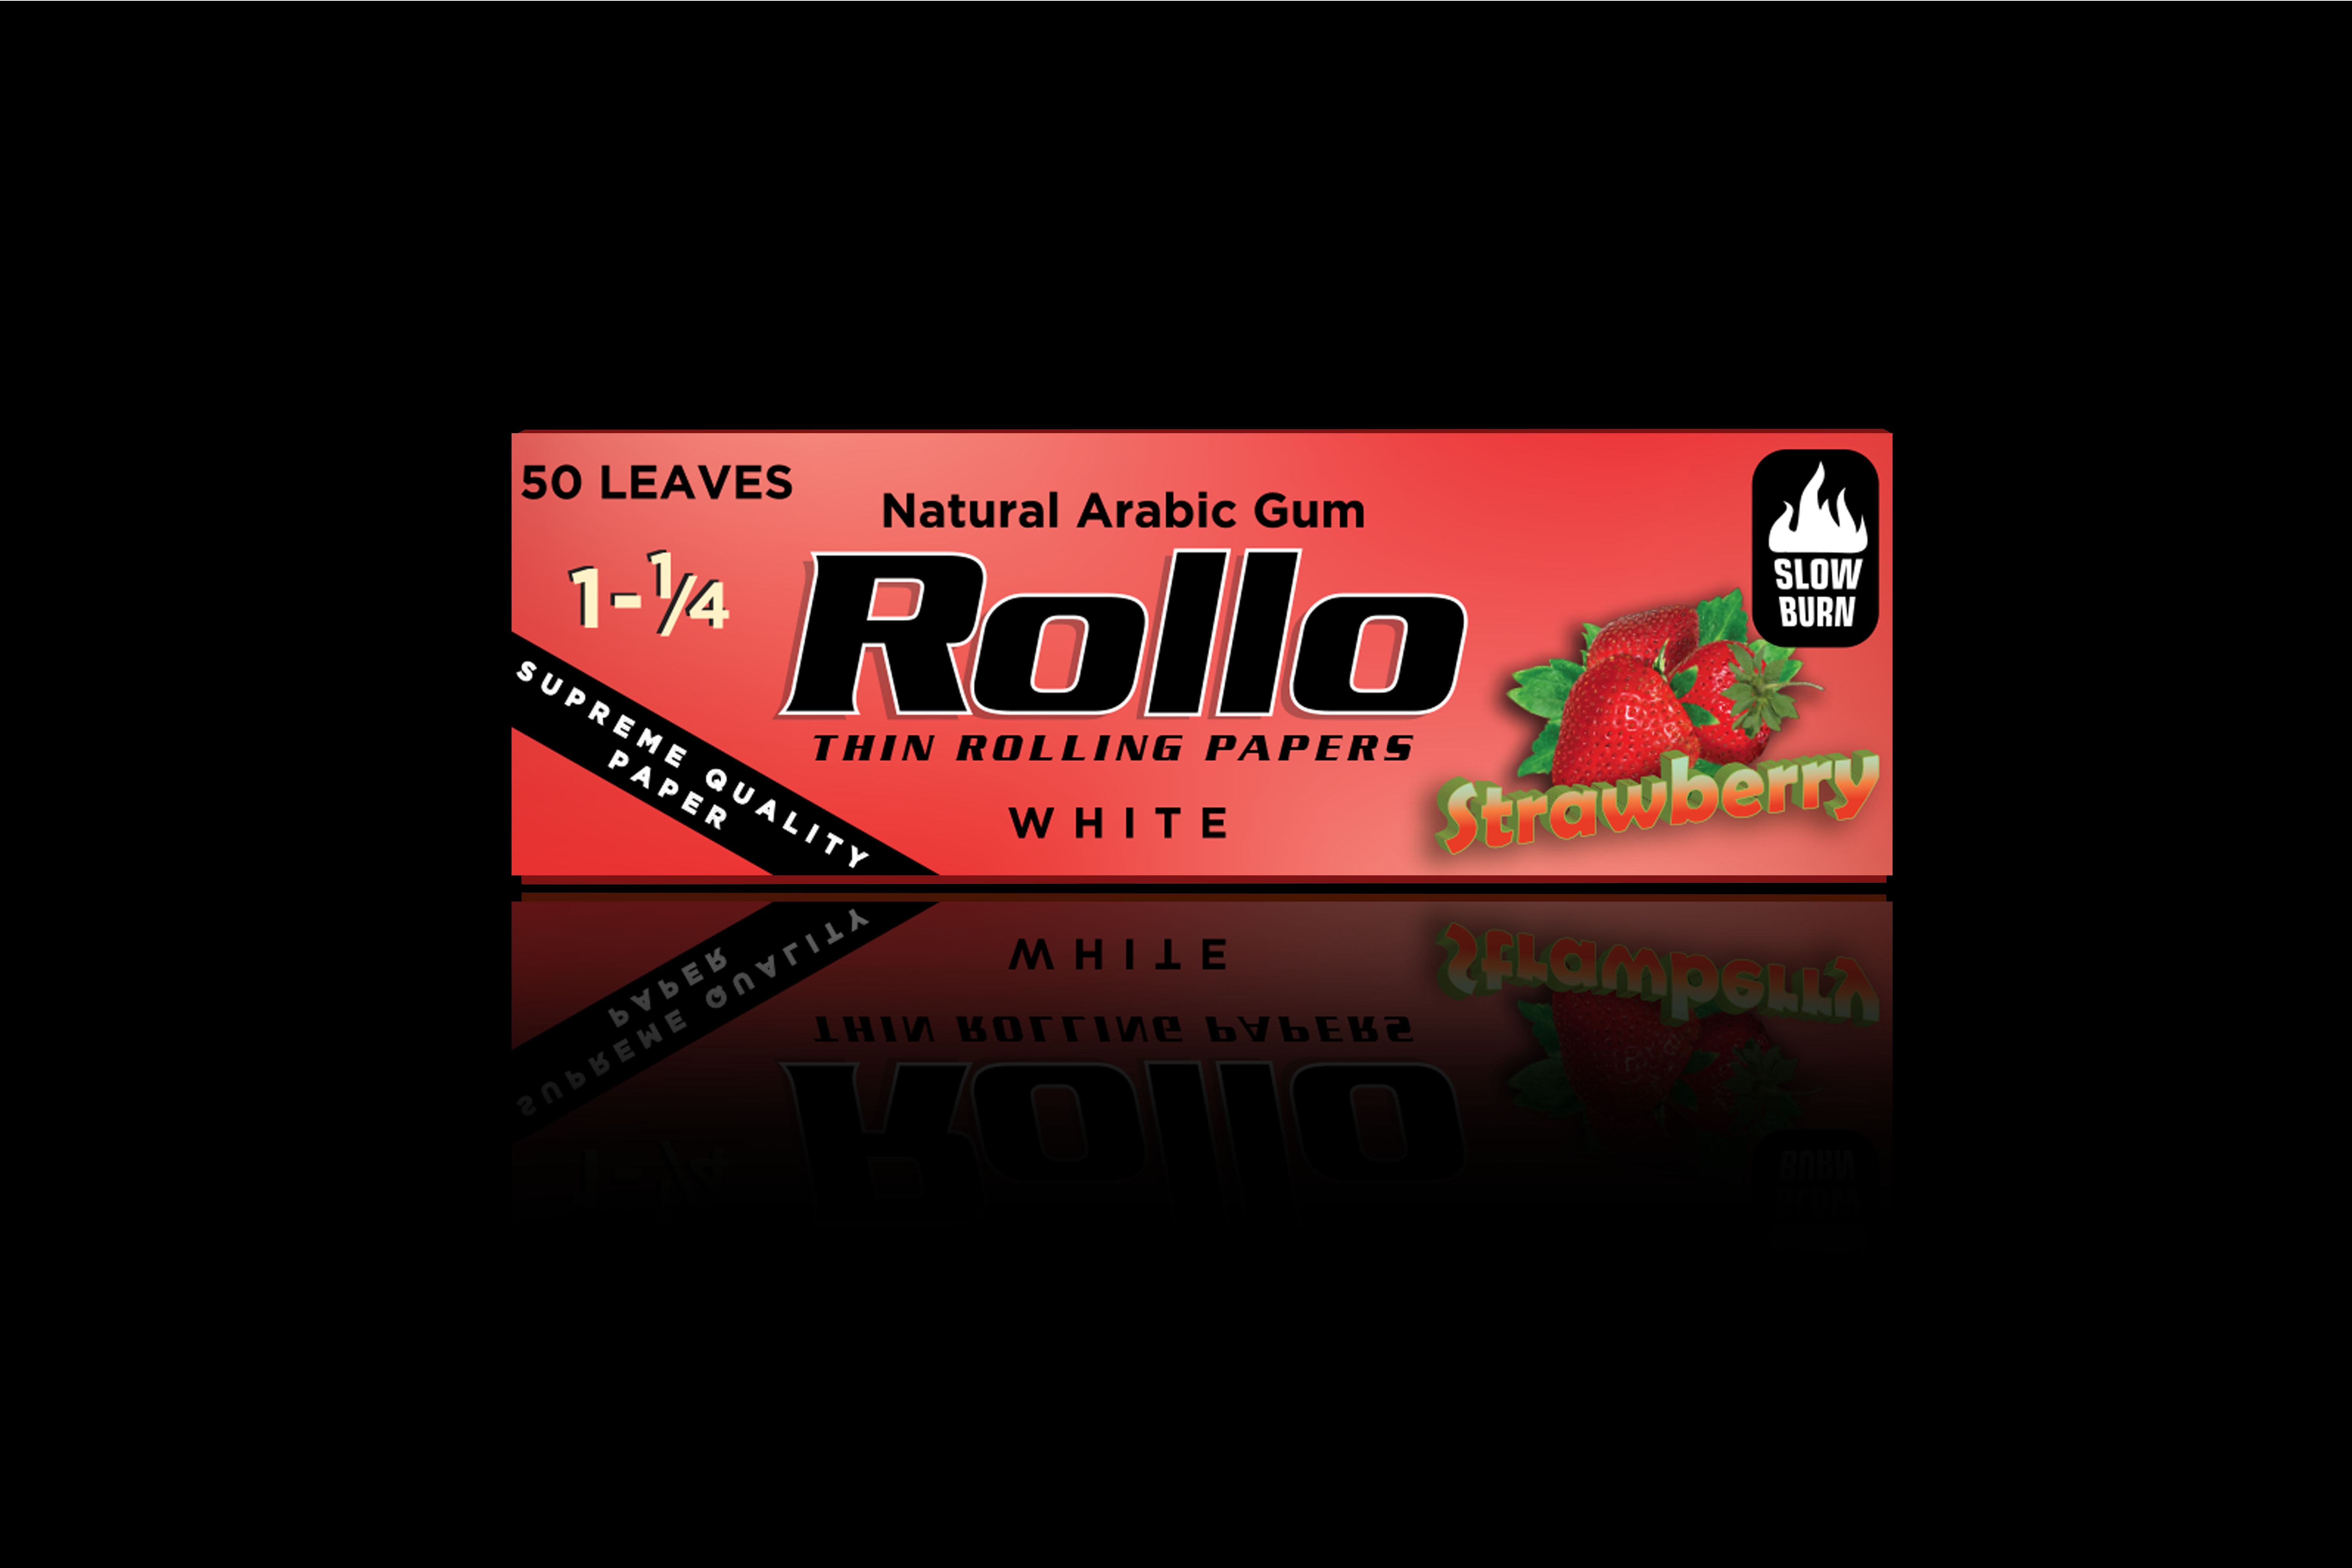 Rolling Papers, Strawberry, Spanish 1 1/4 44 x 78